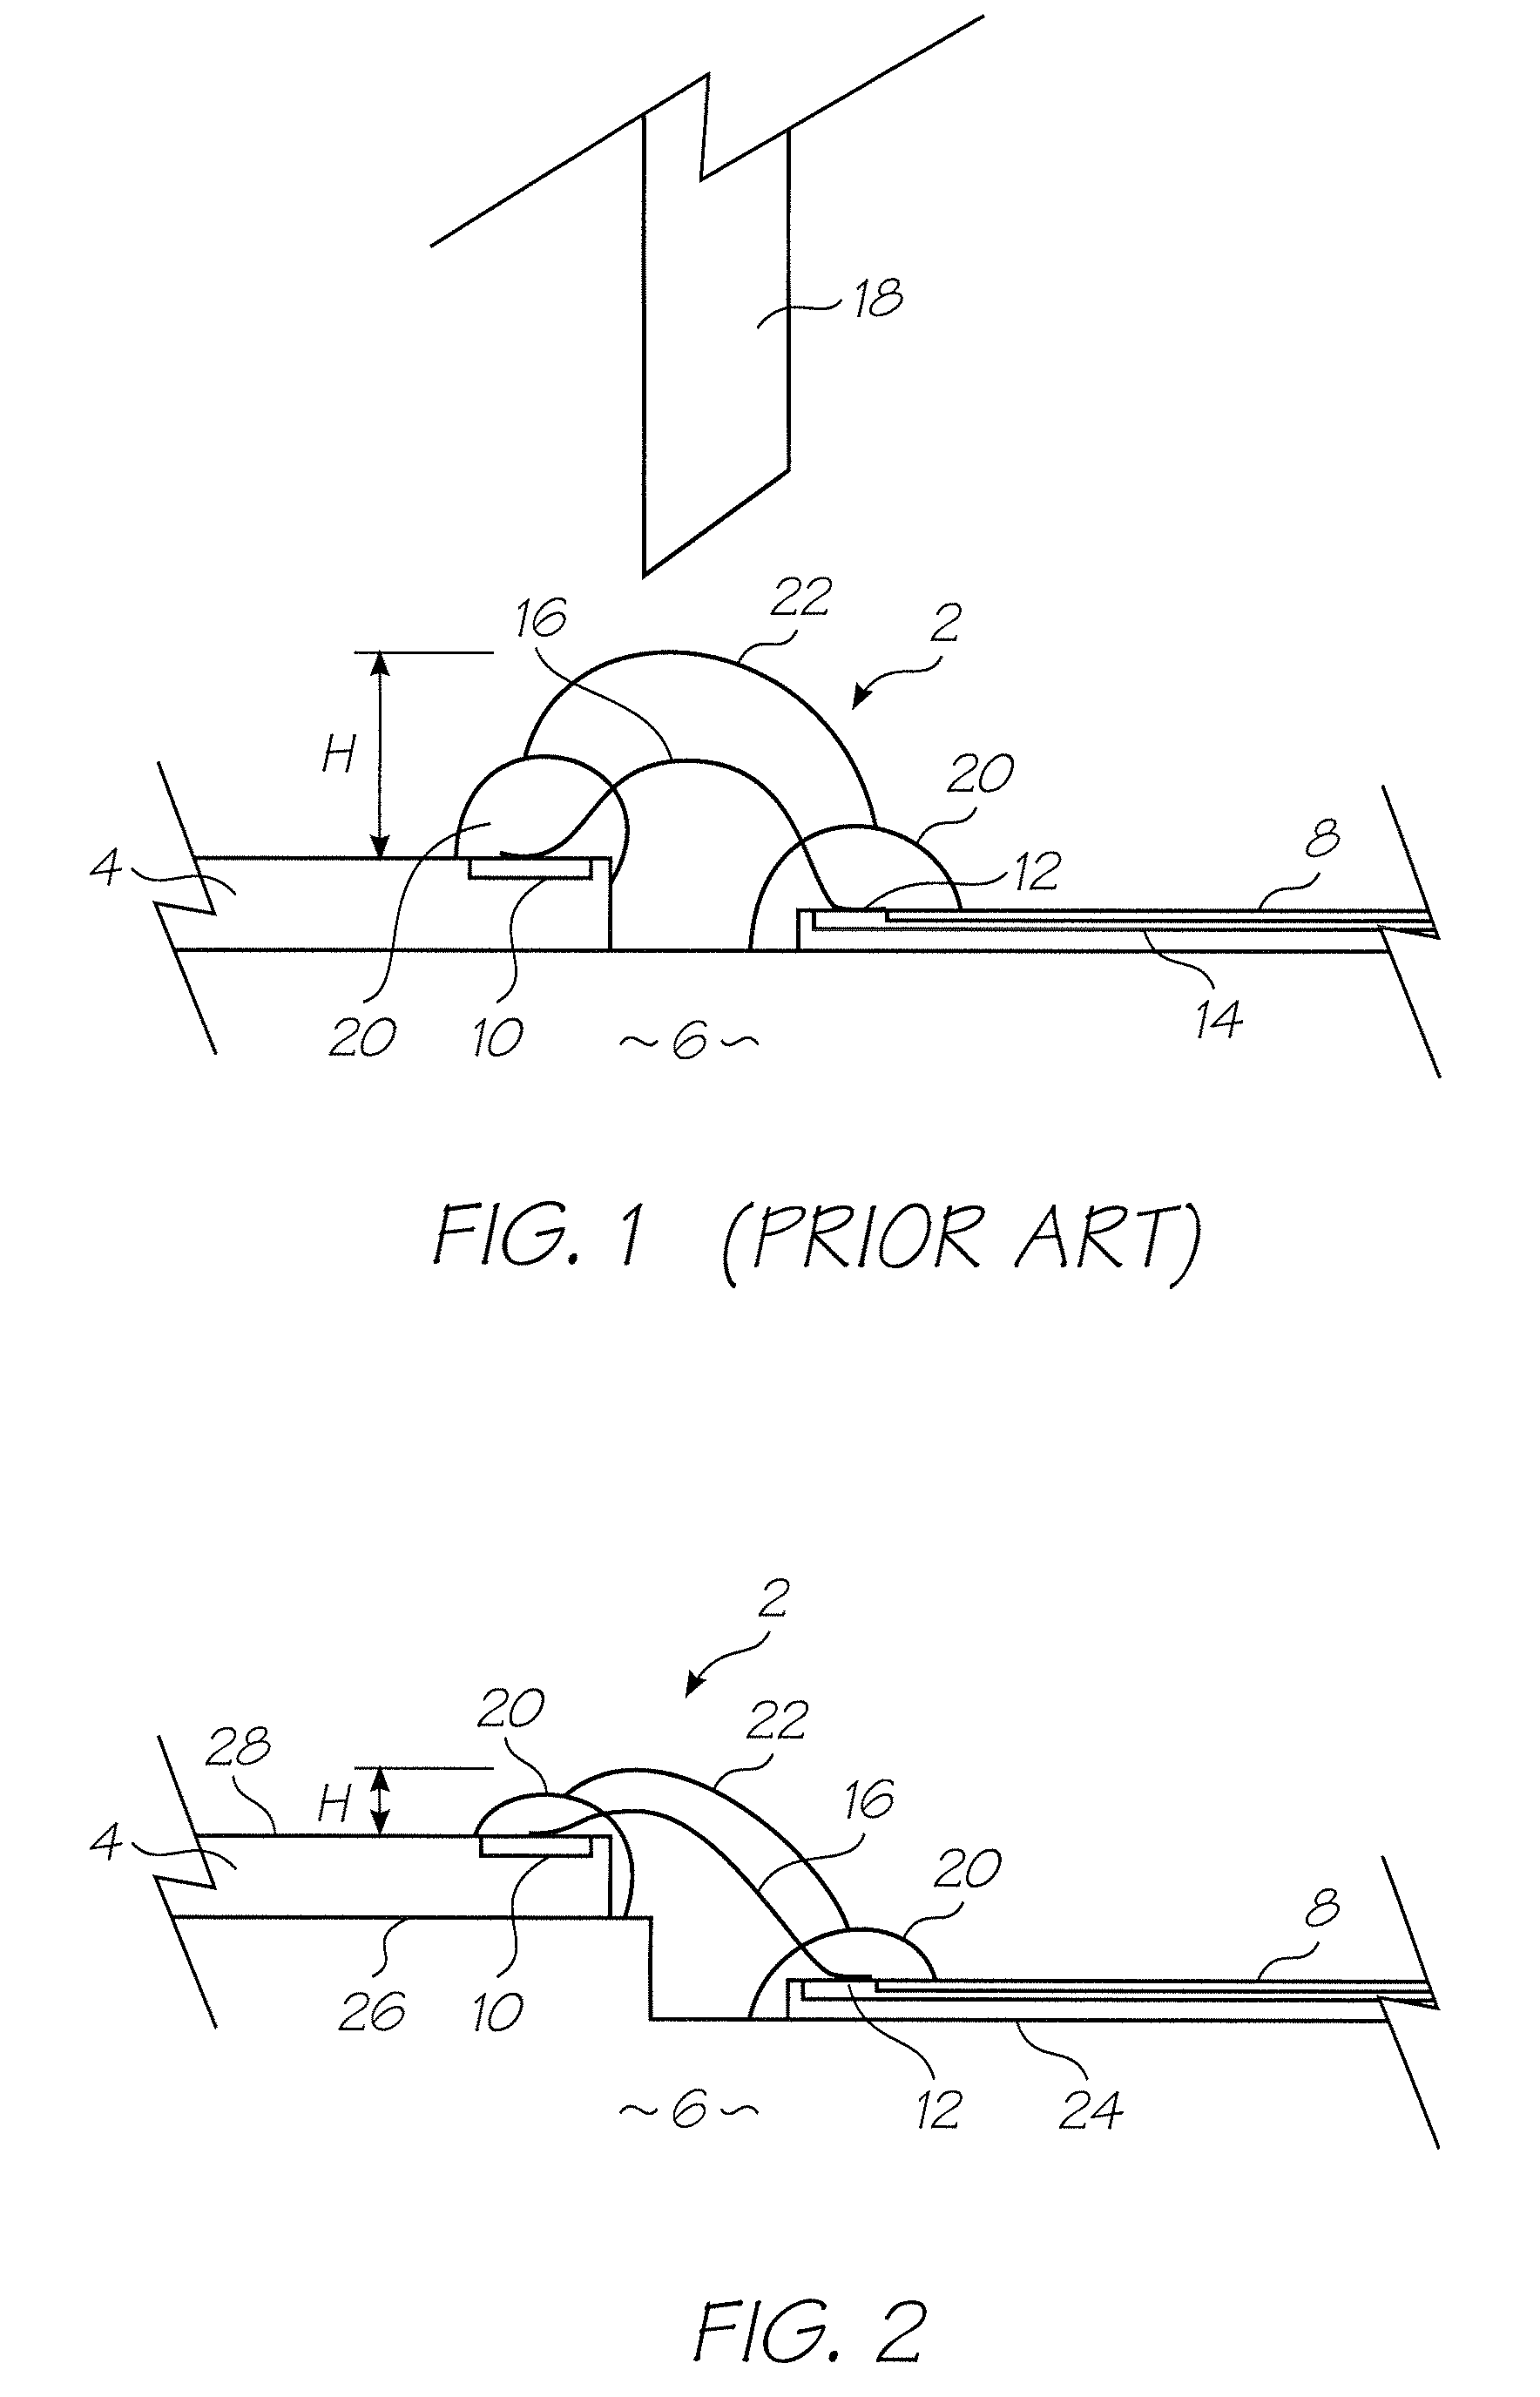 Method of reducing wire bond profile height in integrated circuits mounted to circuit boards